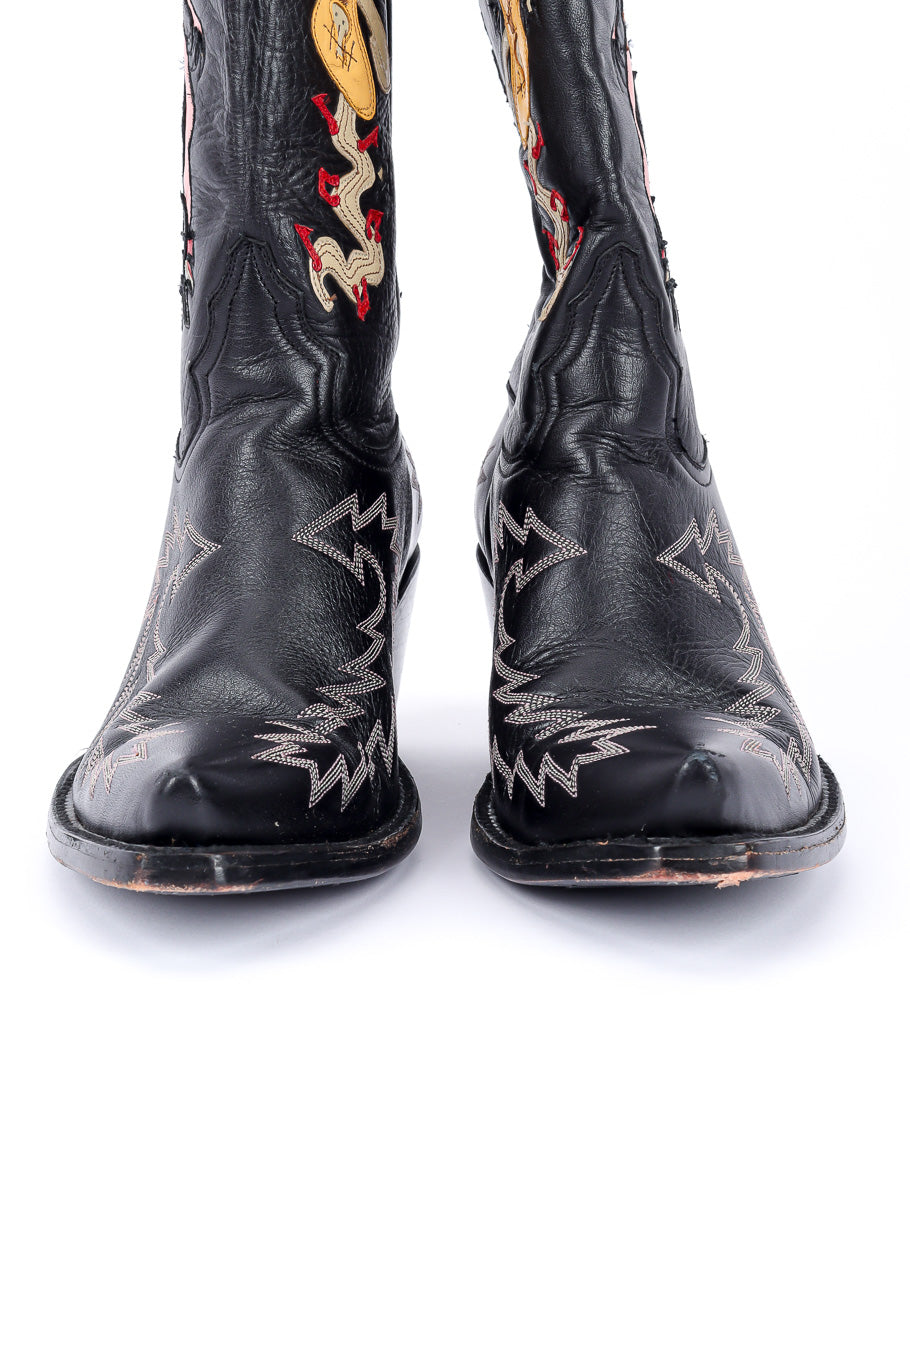 Liberty Boot Co. Kiss My Axe Western Boots front view of pointed toe on white backdrop @Recessla